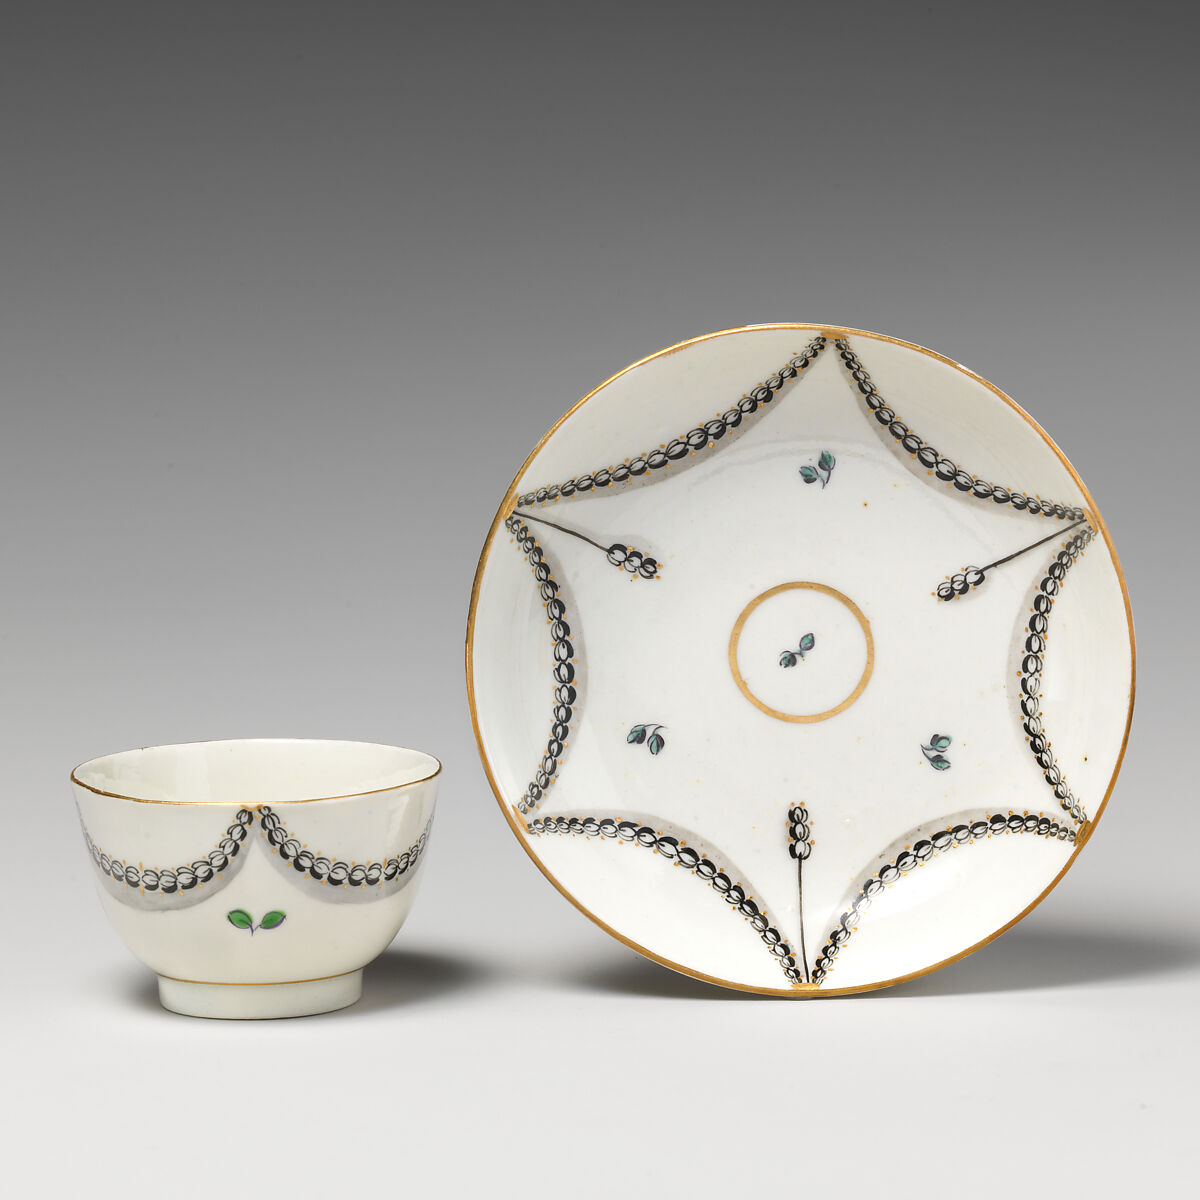 Teabowl (part of a service), Caughley Factory (British, ca. 1772–1799), Soft-paste porcelain with enamel decoration and gilding, British, Caughley 